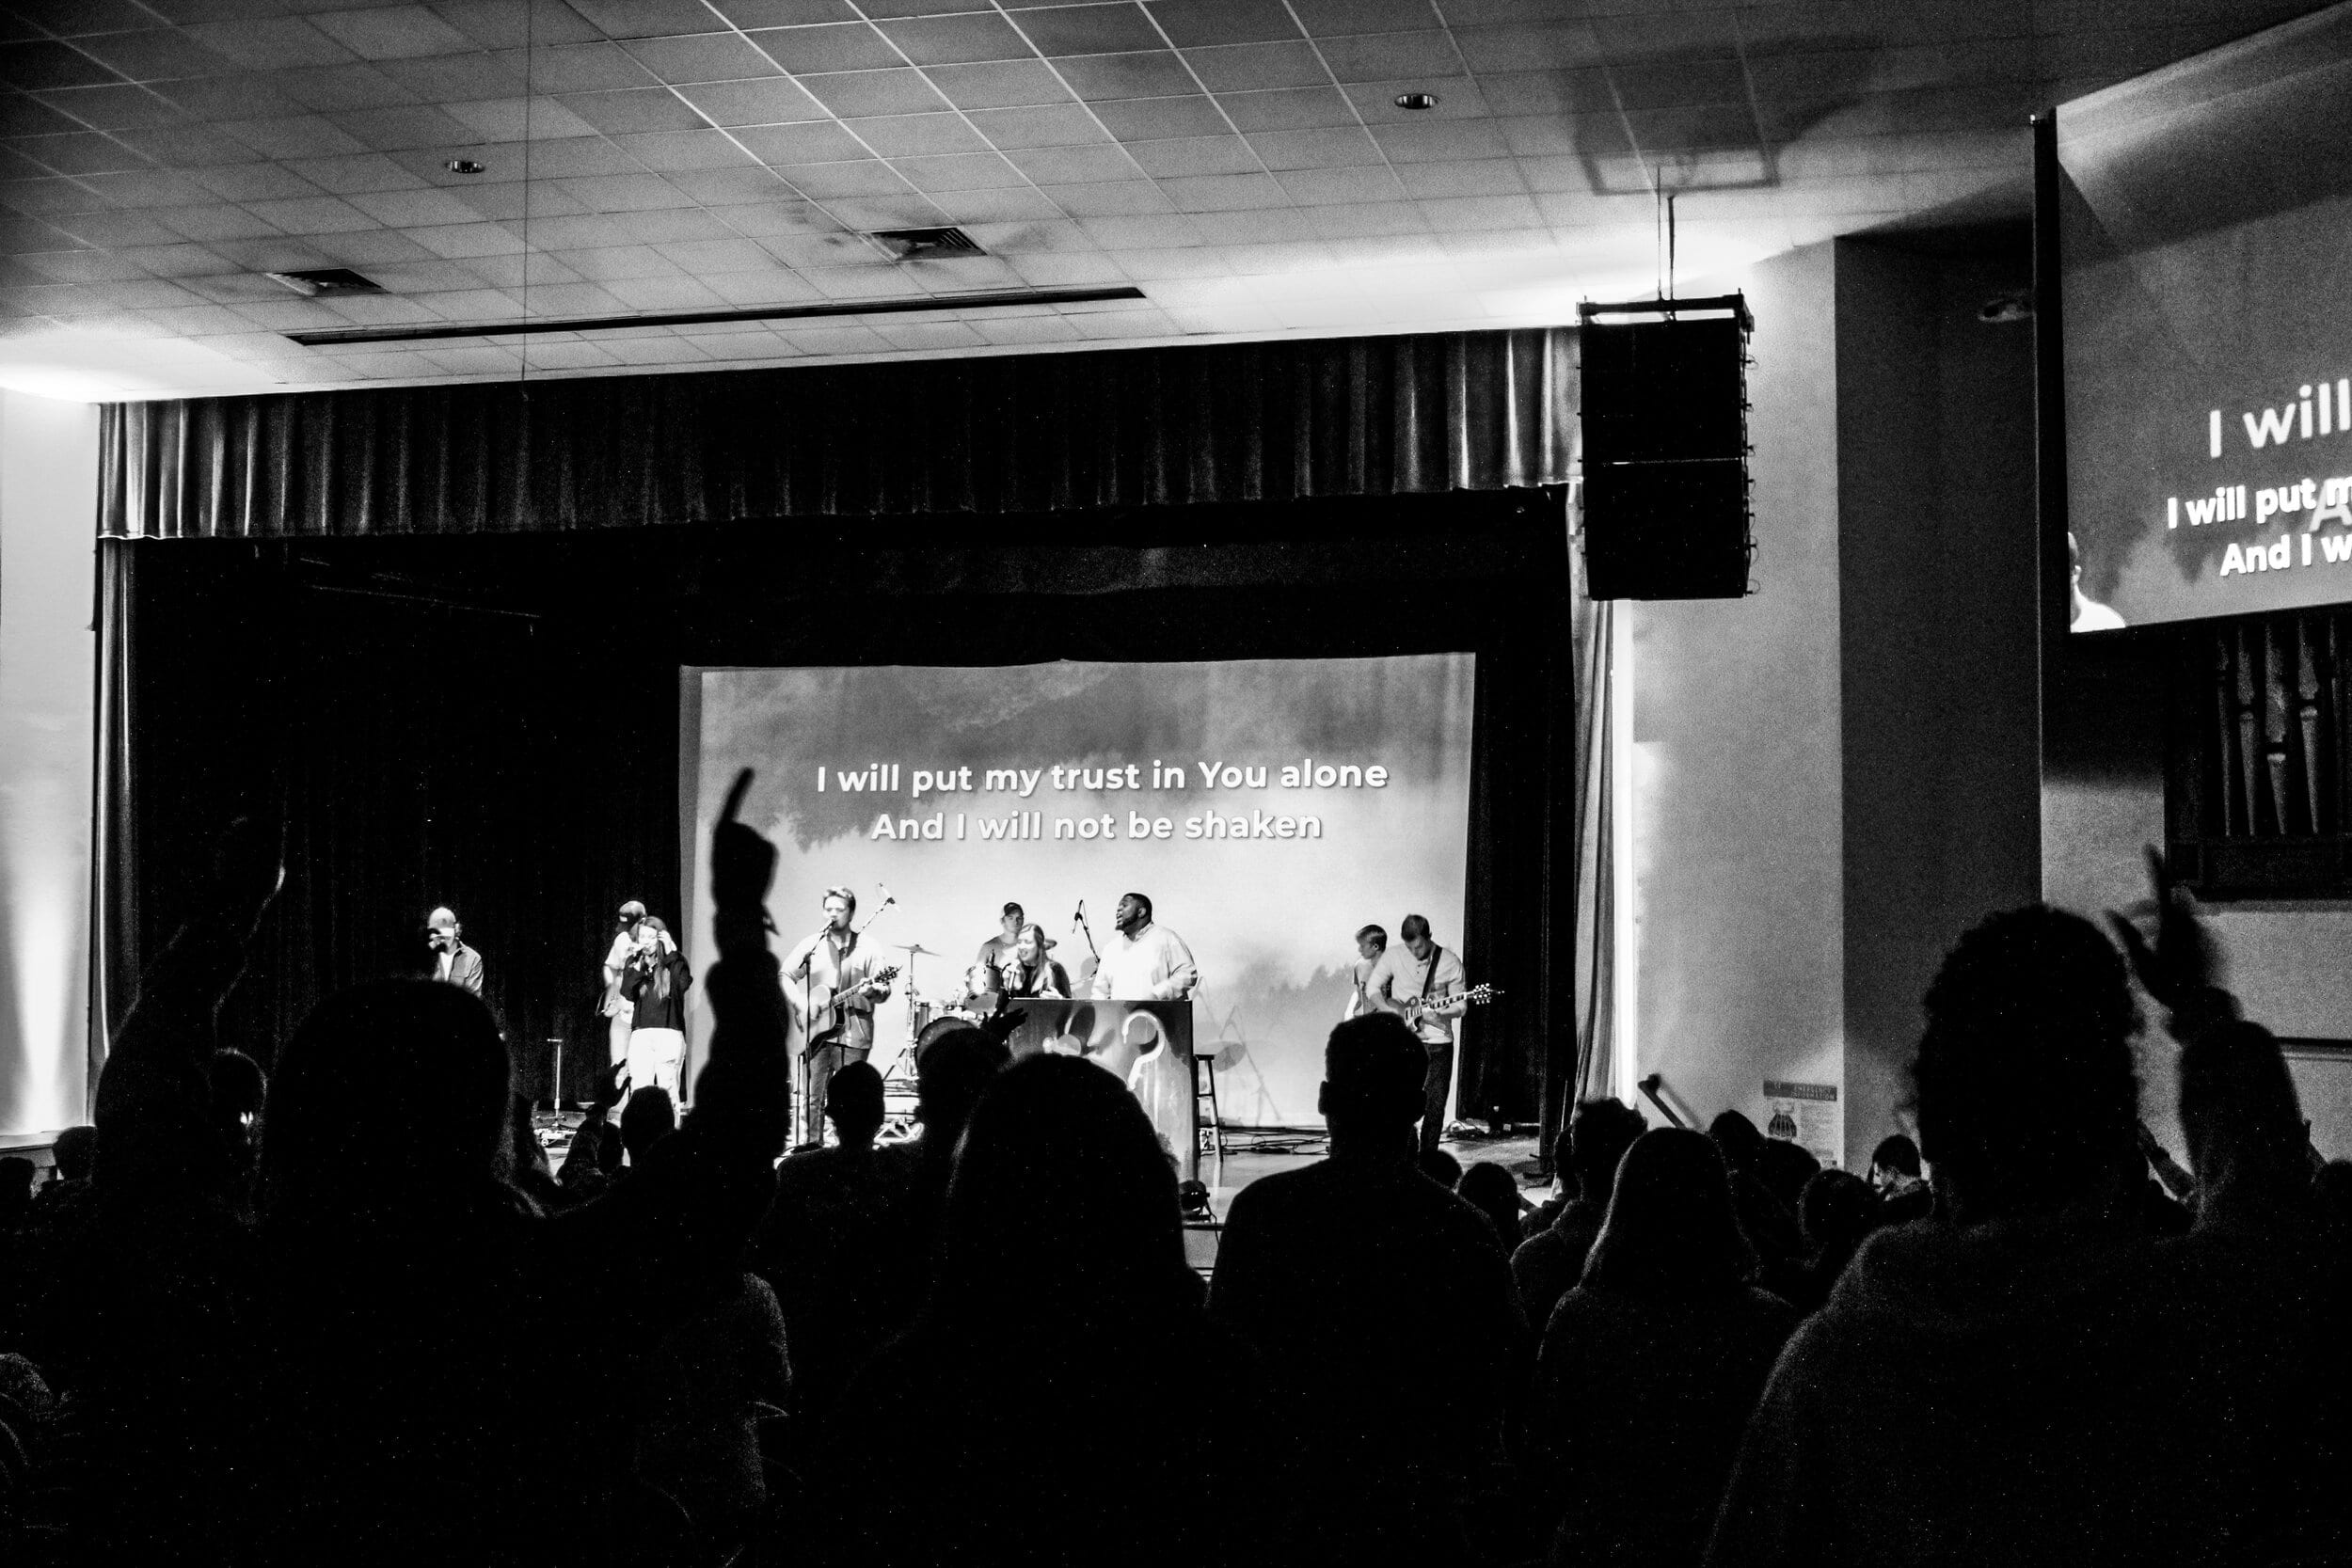 Students singing Build My Life as the band is leading.